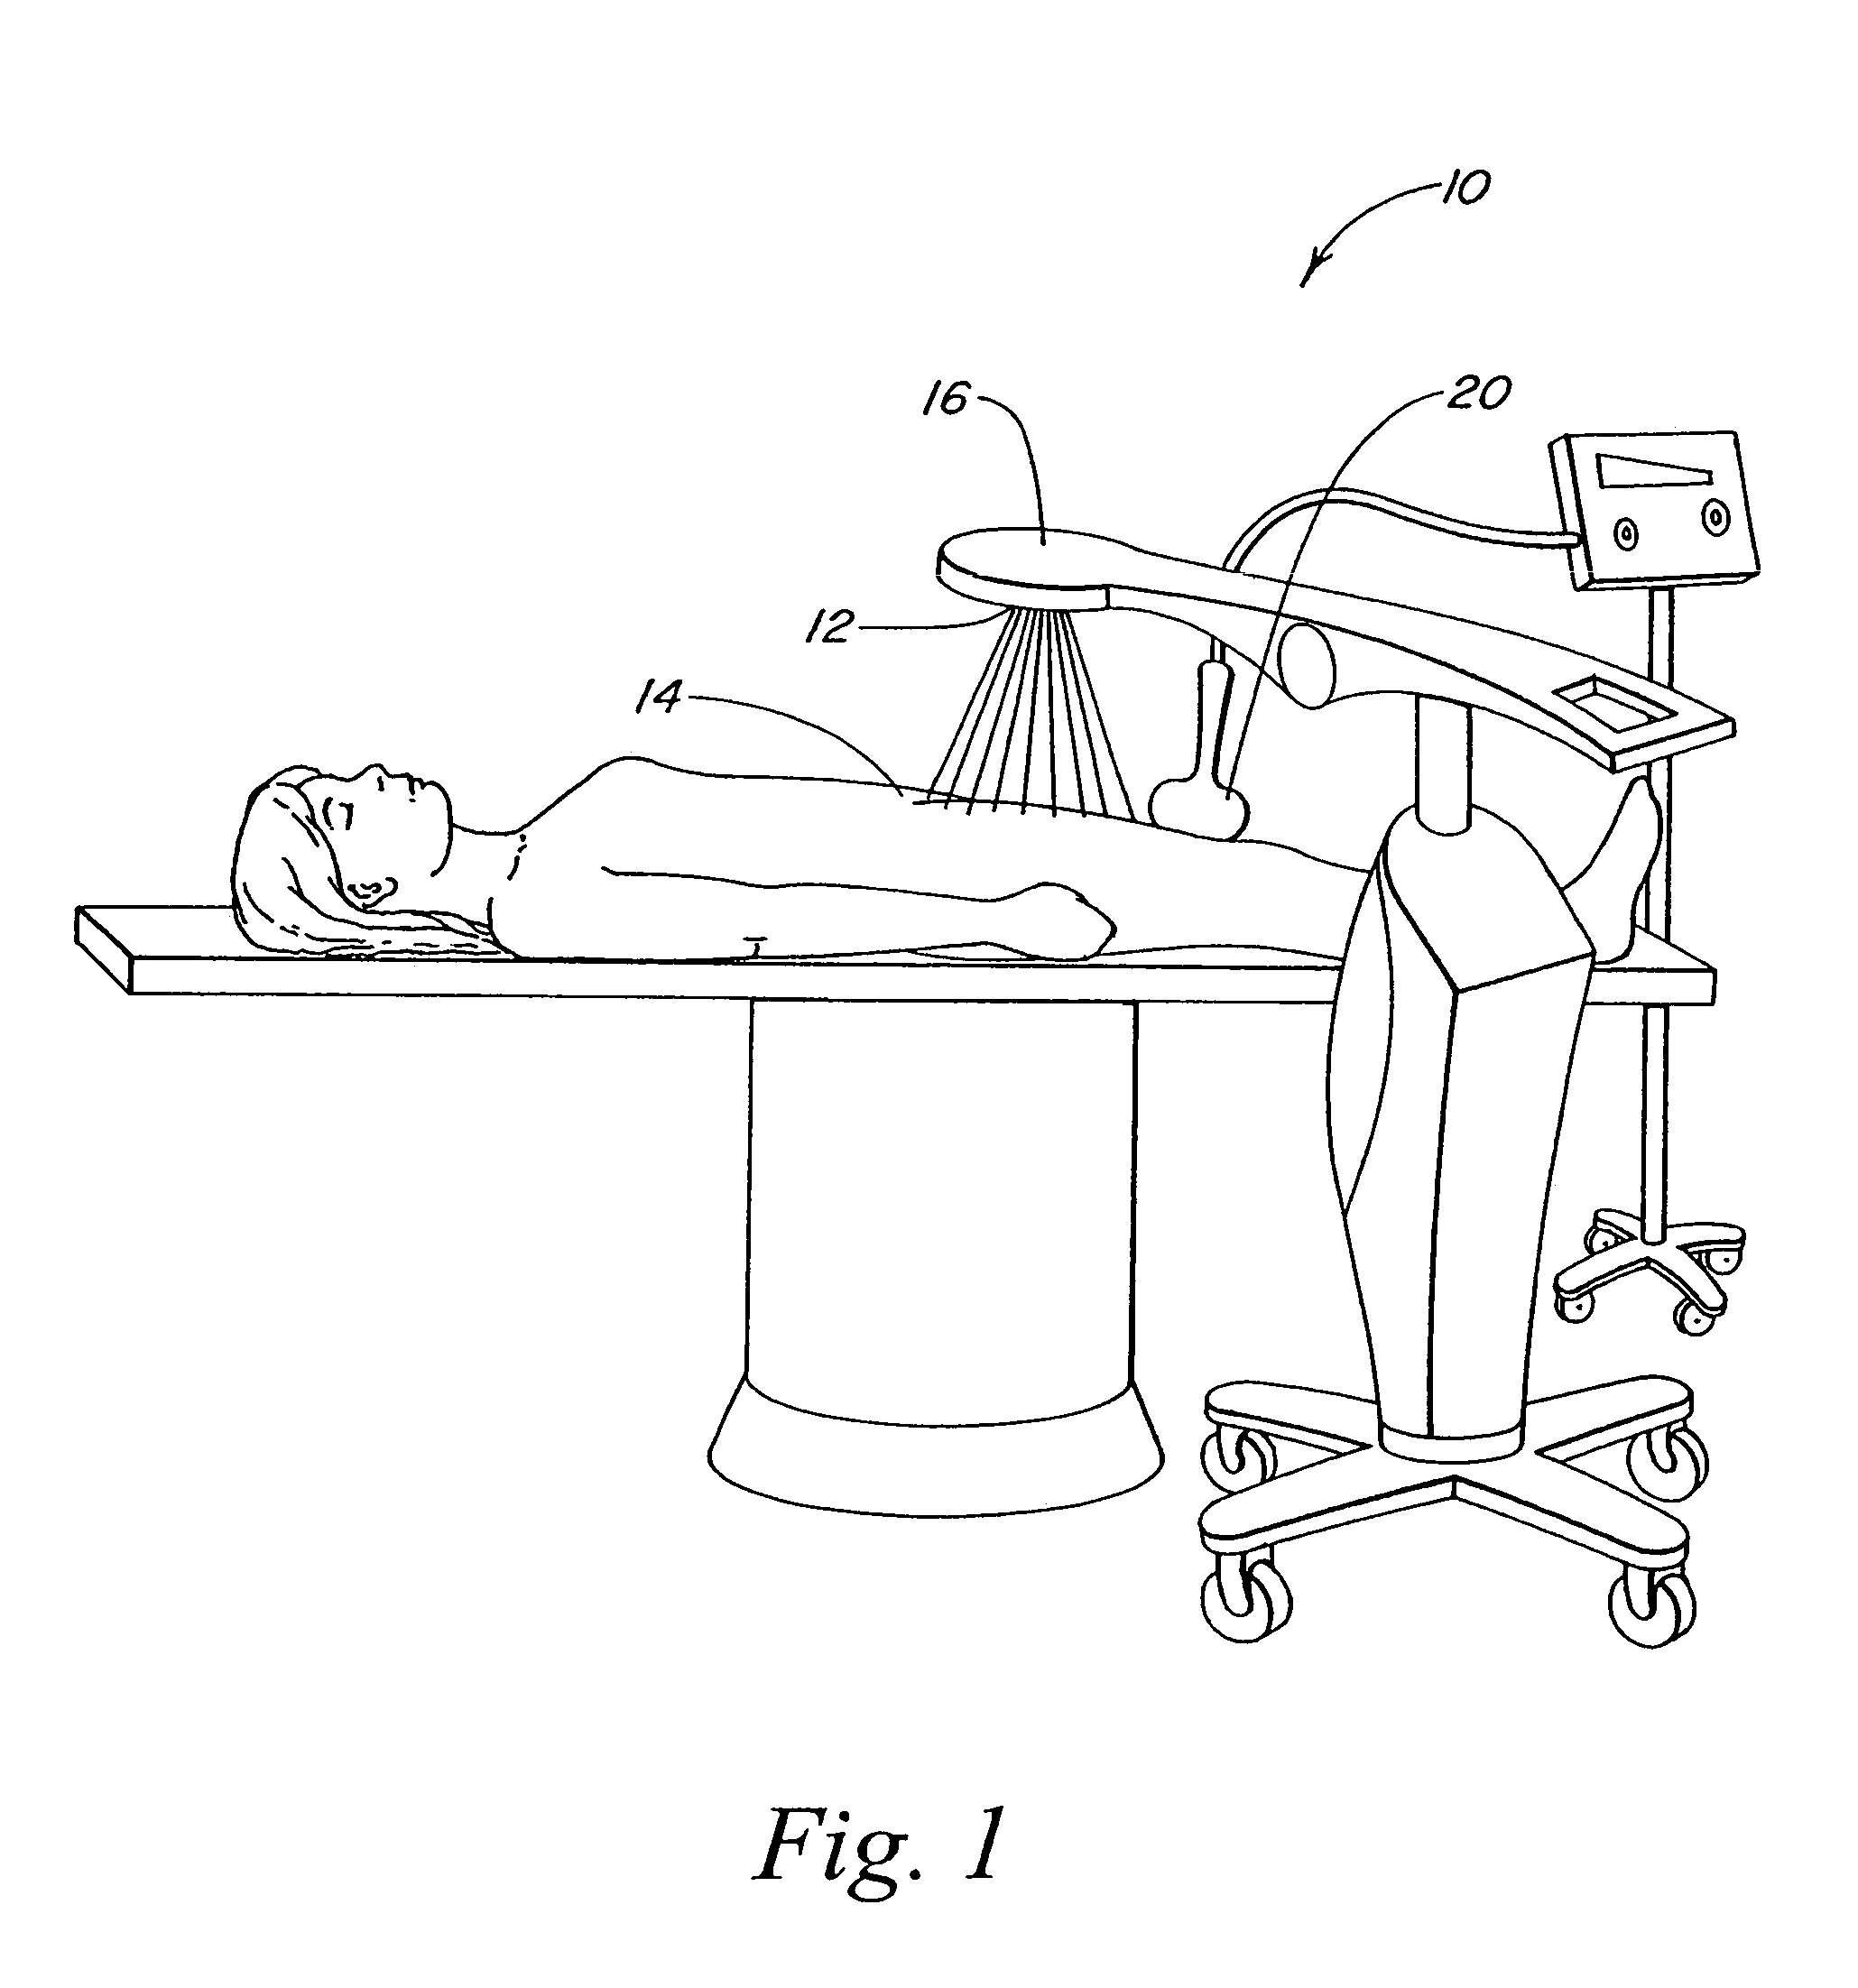 System and method for tissue treatment